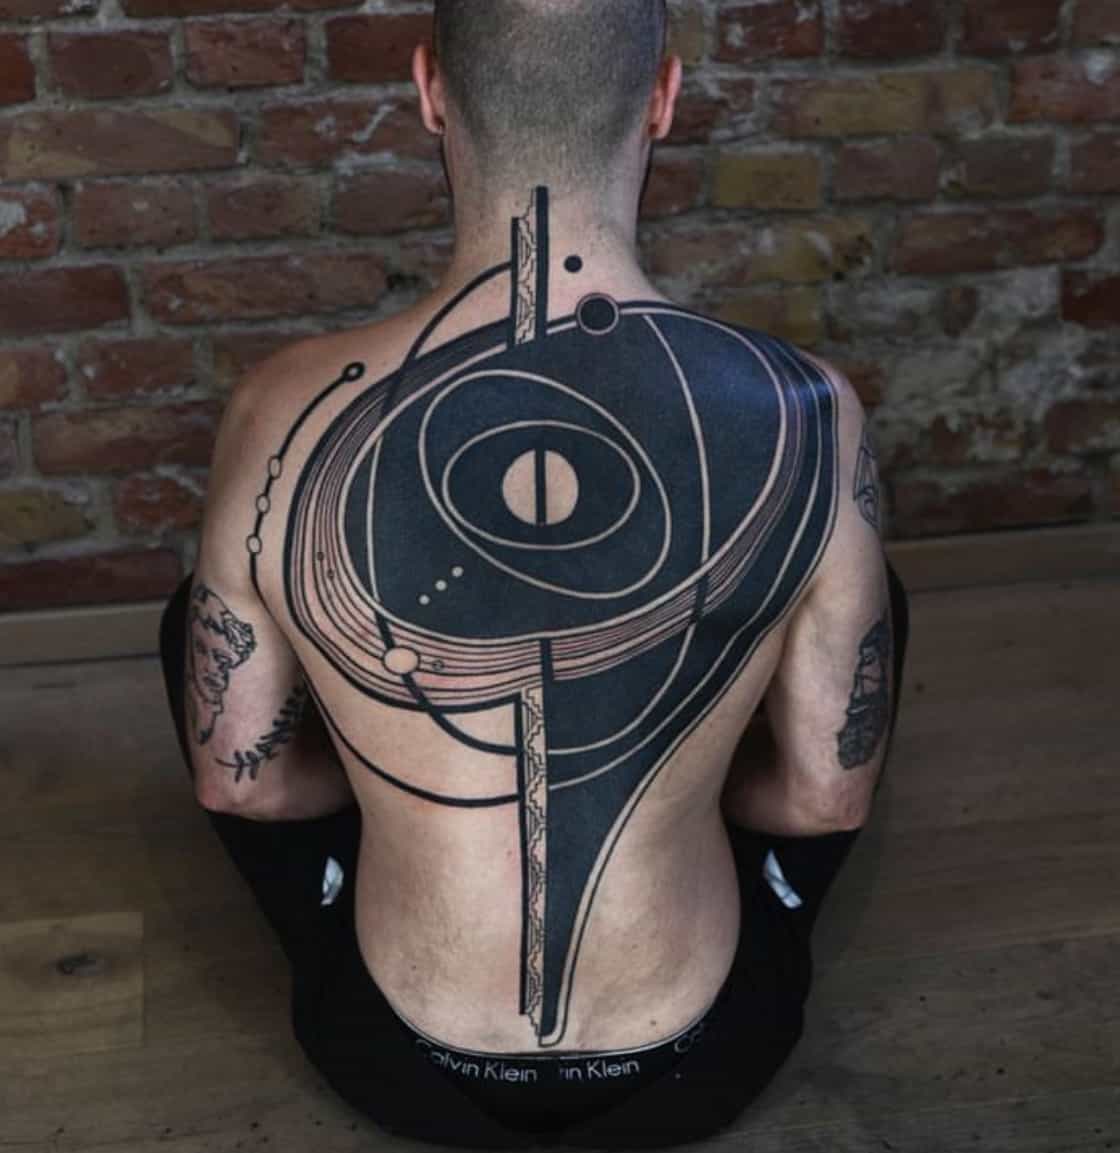 Blackout Tattoos- The Current Trend In Body Ink – Empty Kingdom